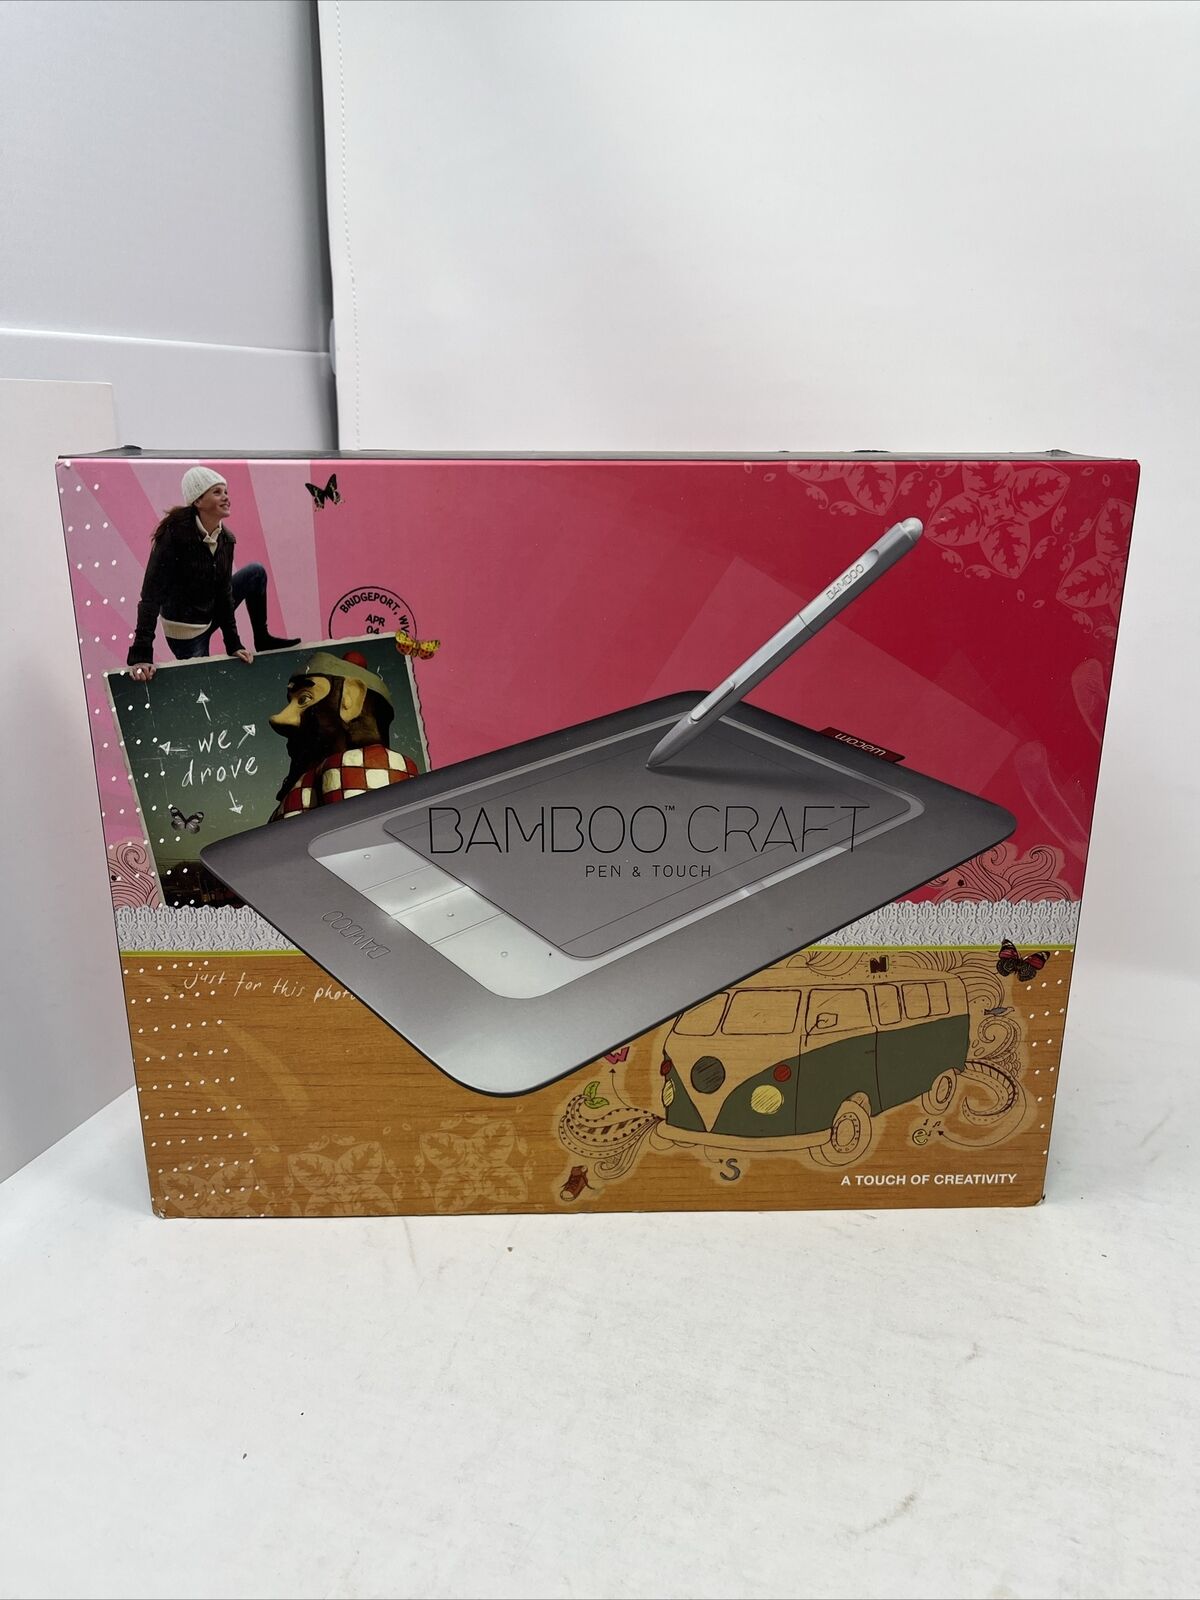 Wacom Bamboo Craft - Pen & Touch - Model CTH-461 with Original Box & Pen